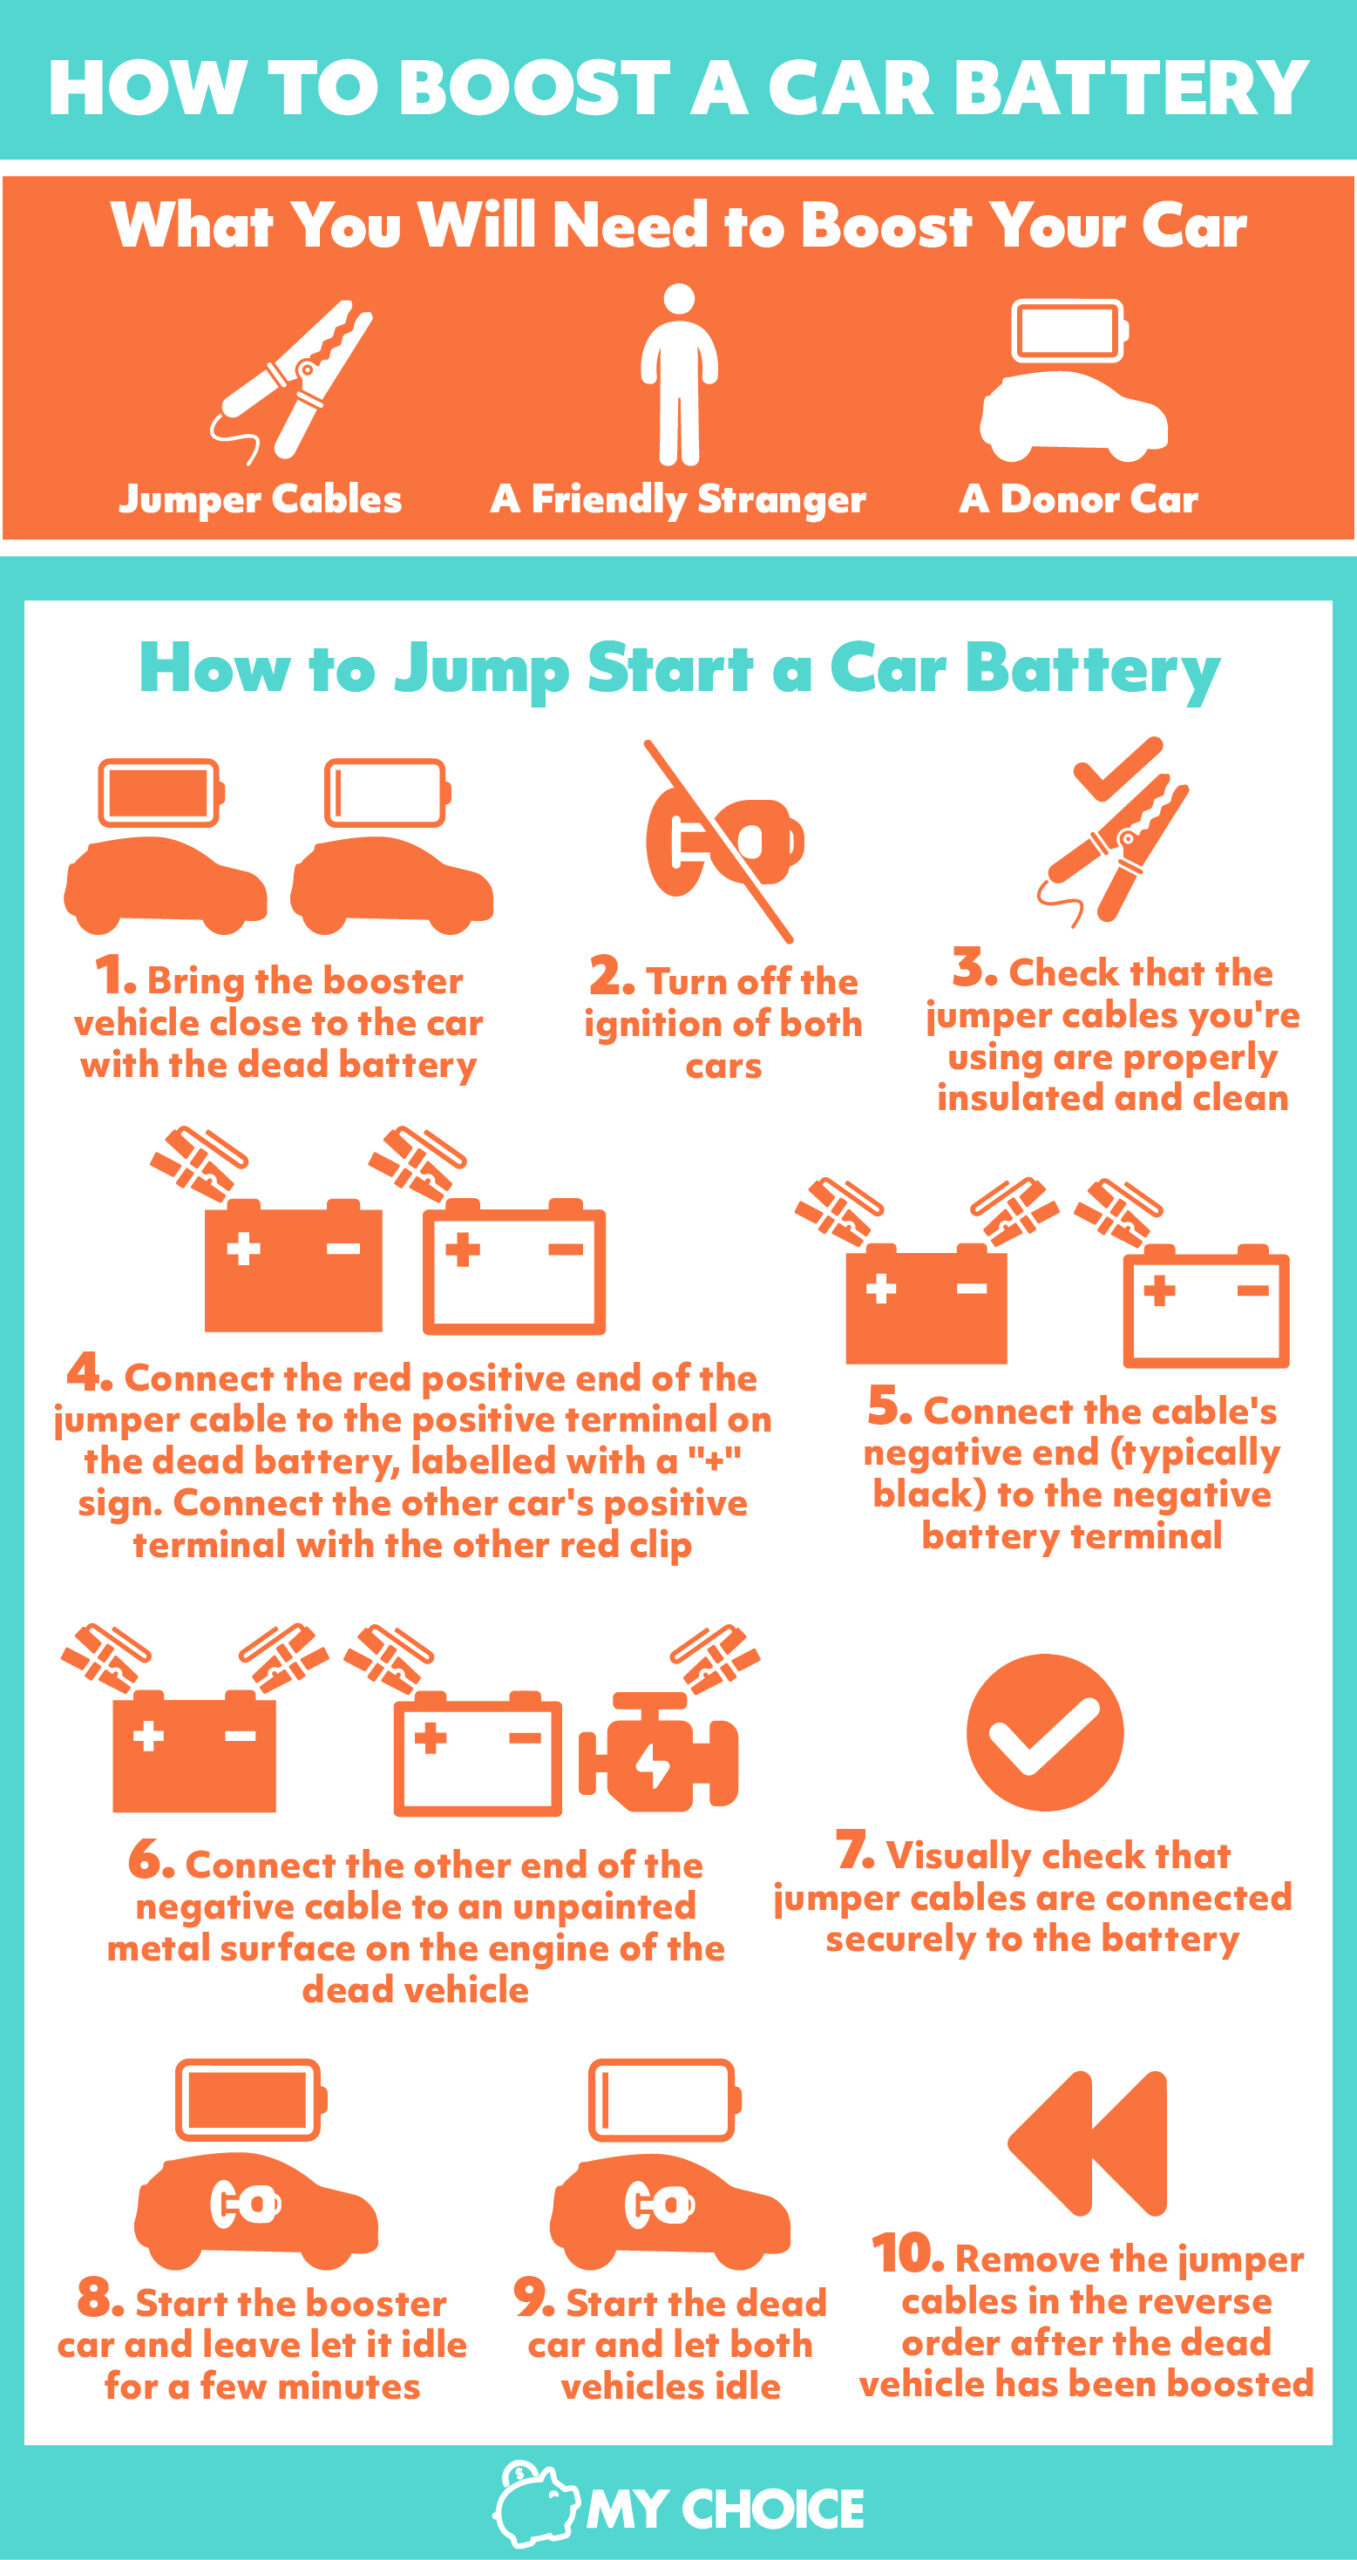 How To Boost A Car How to Boost a Car Battery? | My Choice